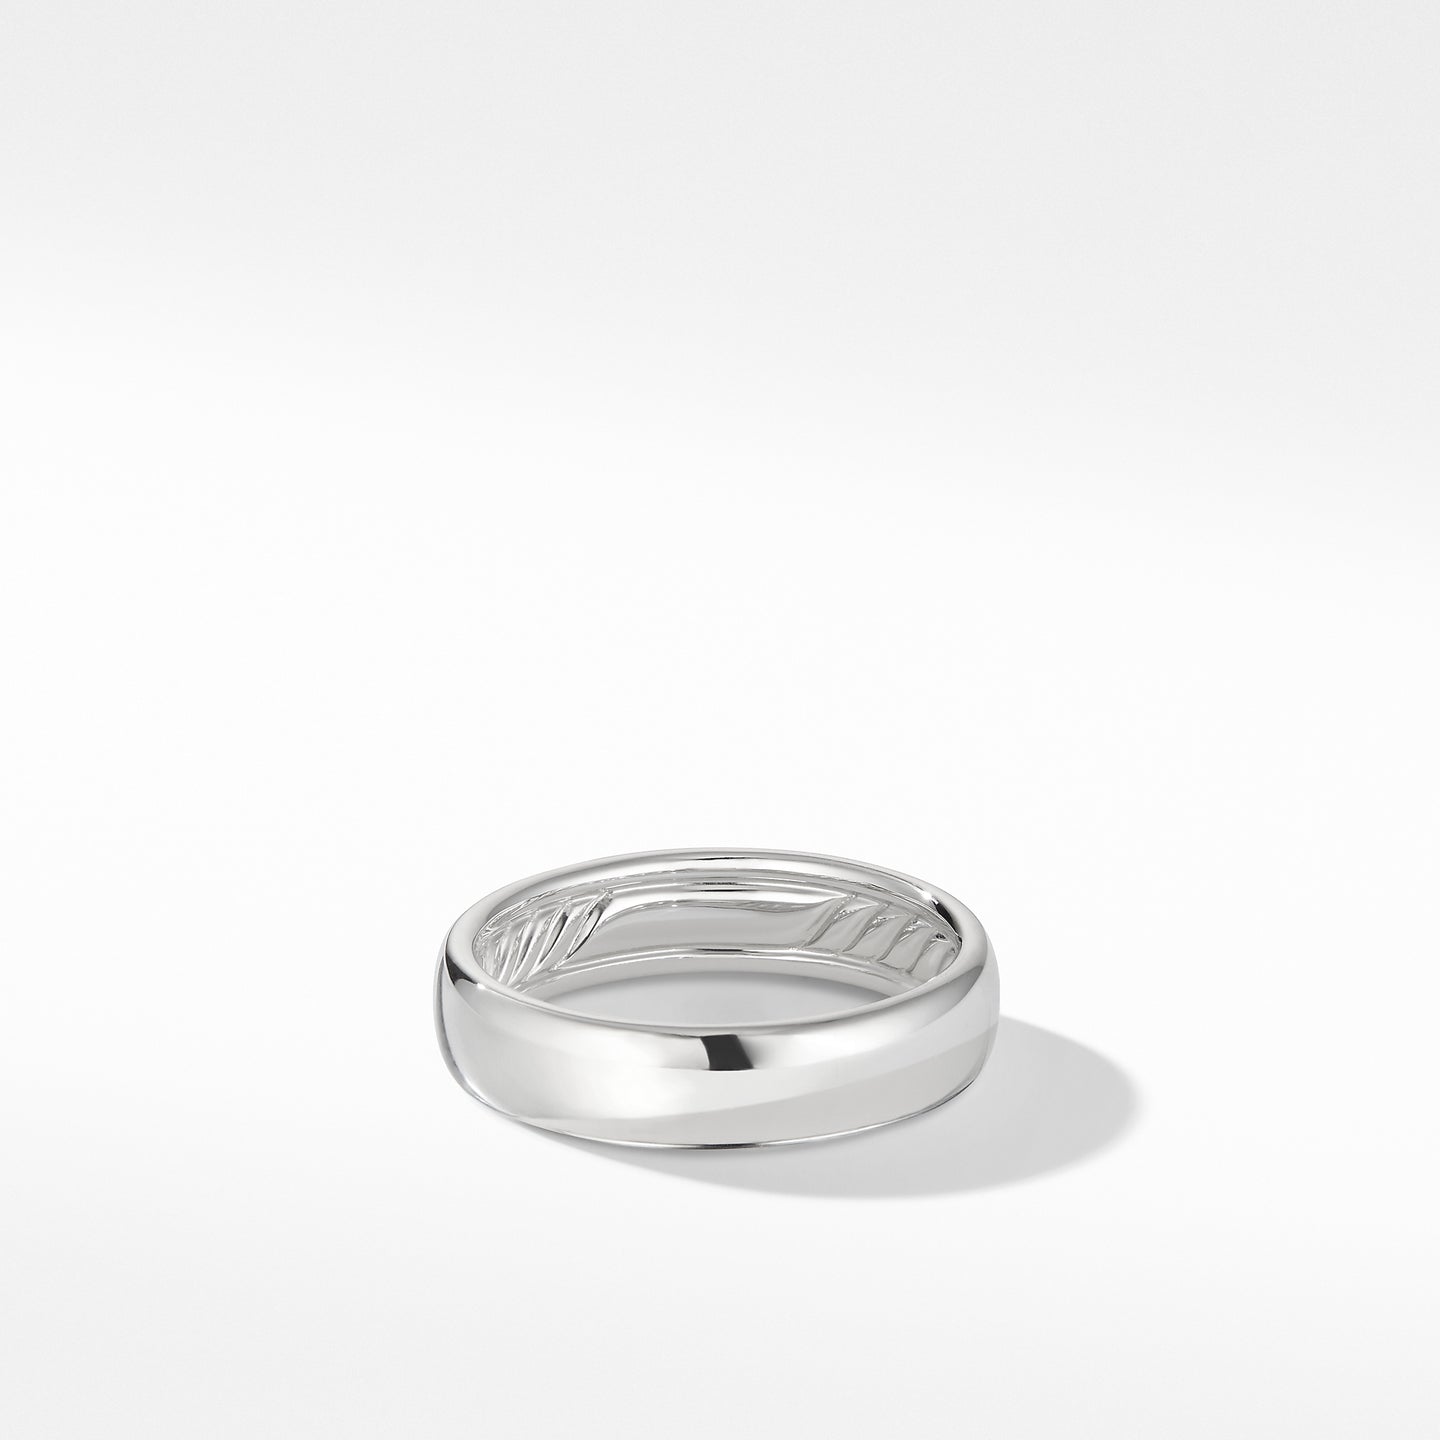 DY Classic Band Ring in 18K White Gold, Size 10